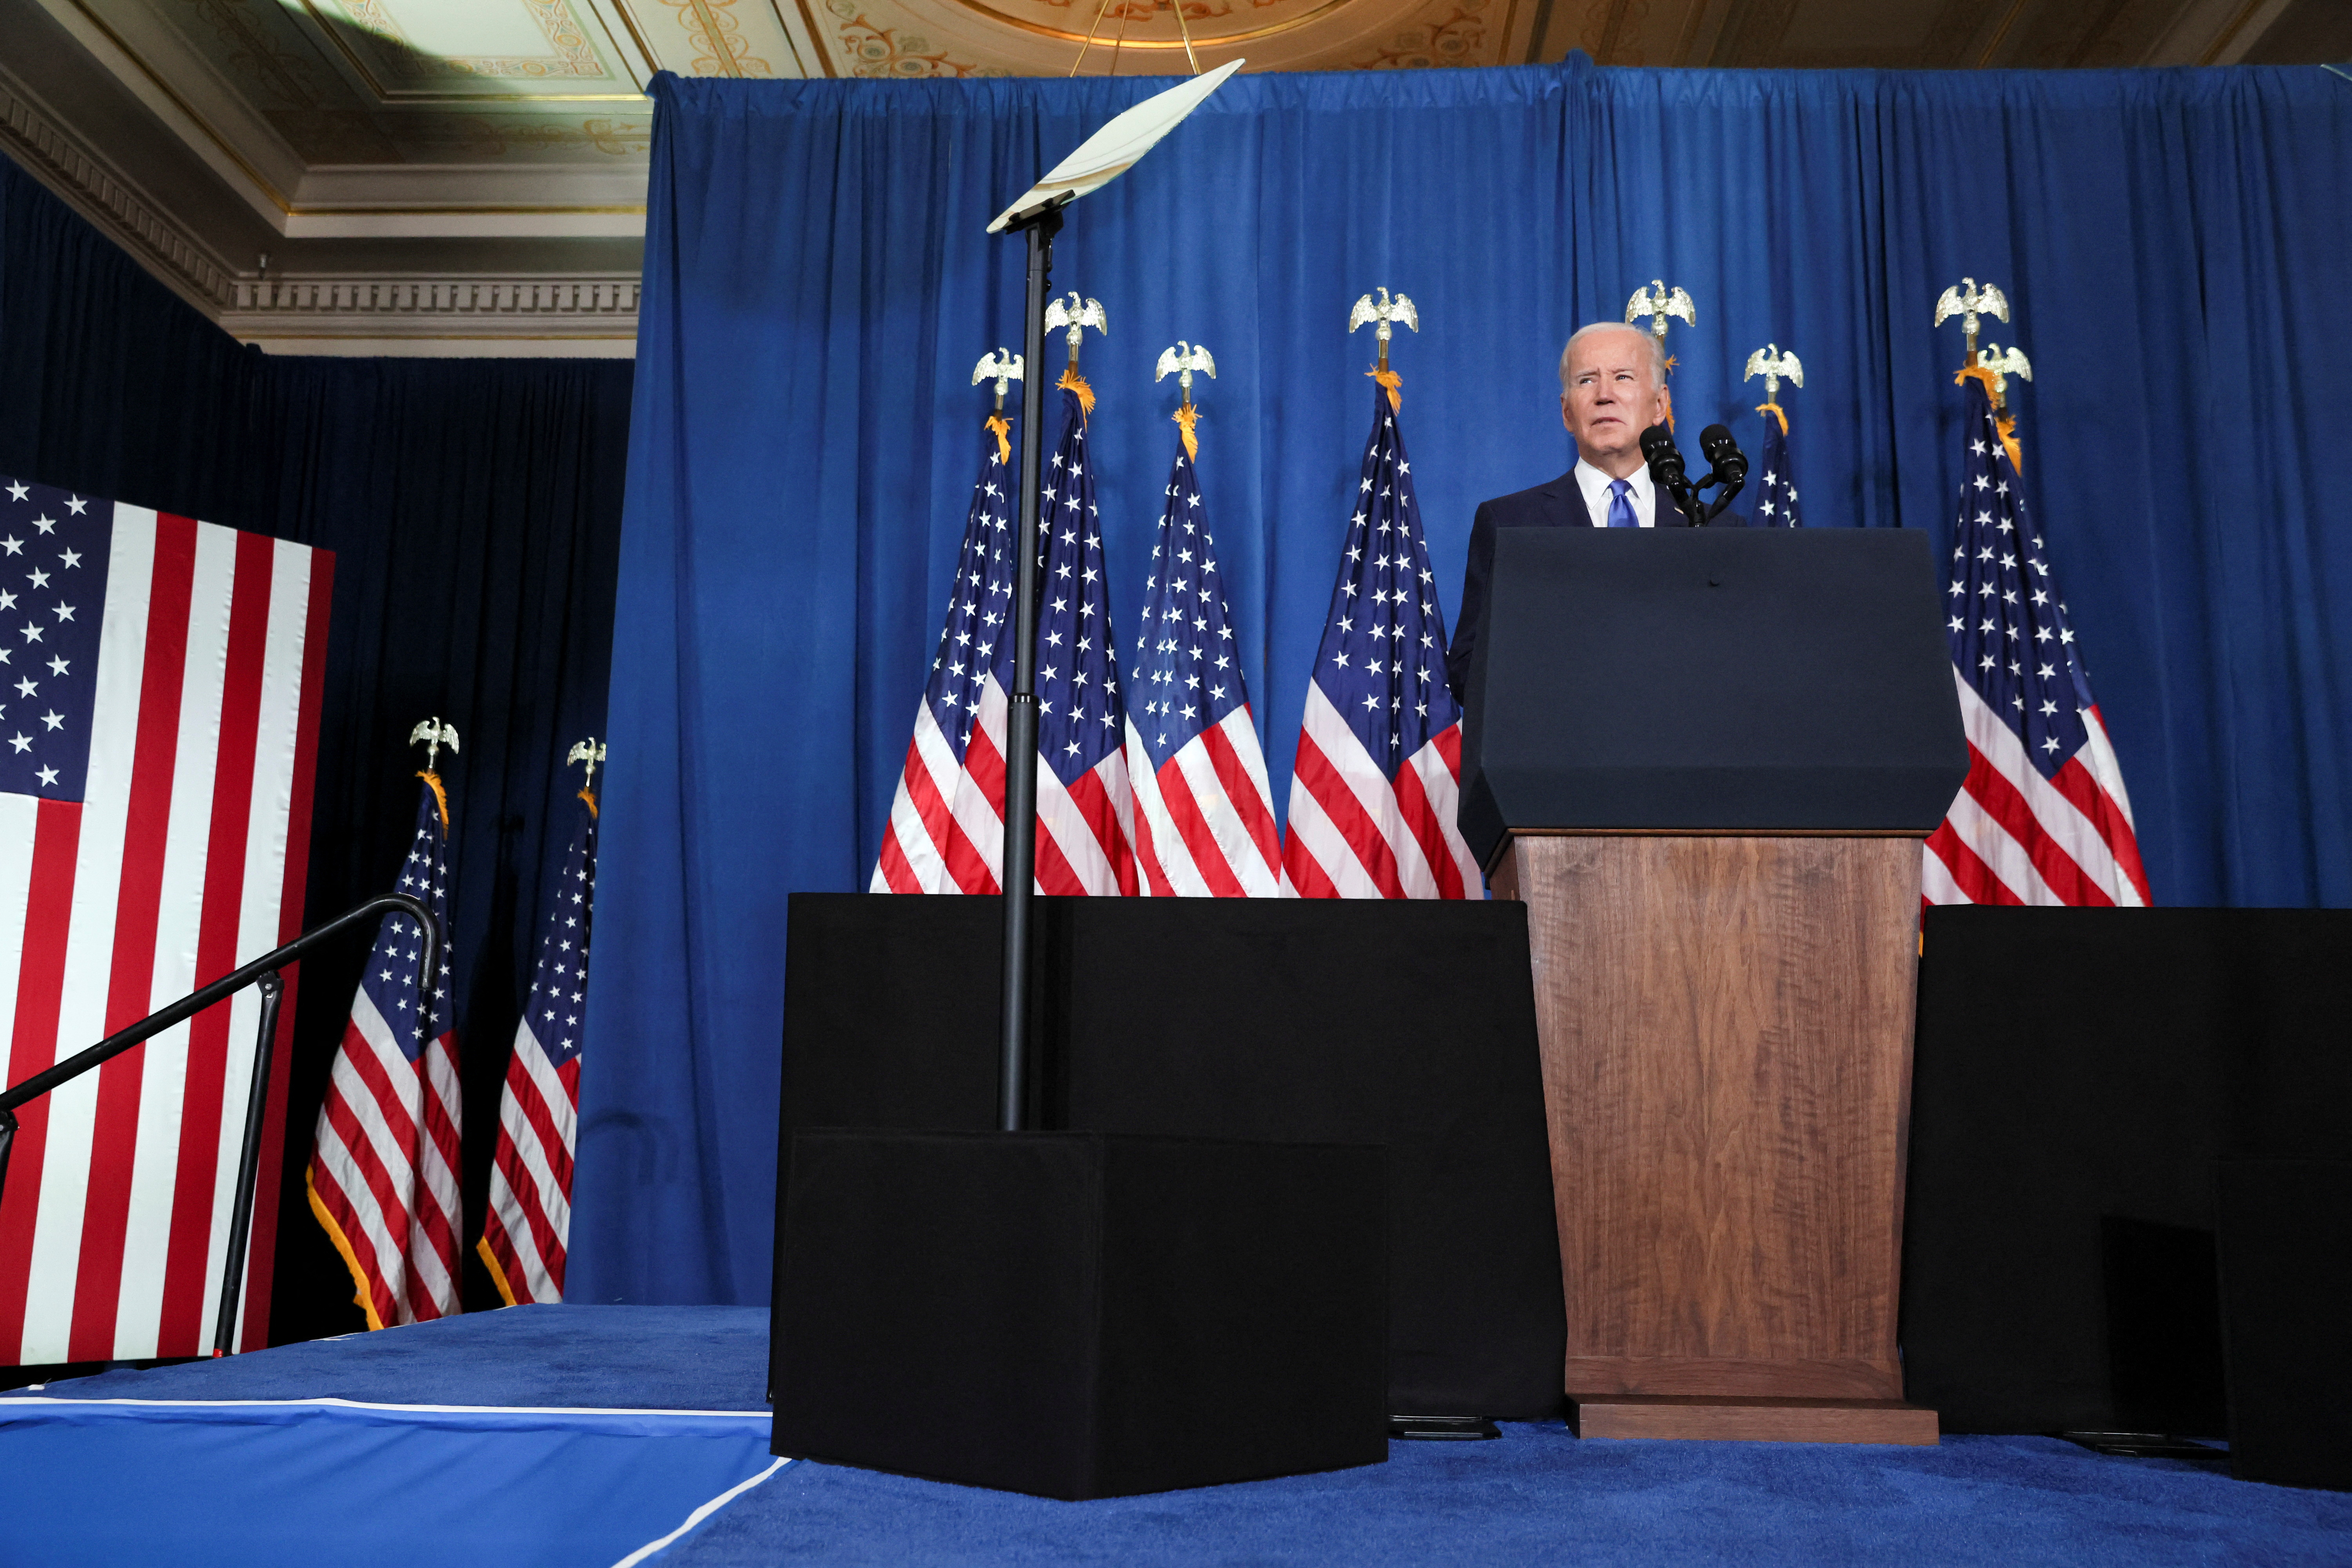 U.S. President Biden speaks during a Democratic National Committee event at the Columbus Club in Washington